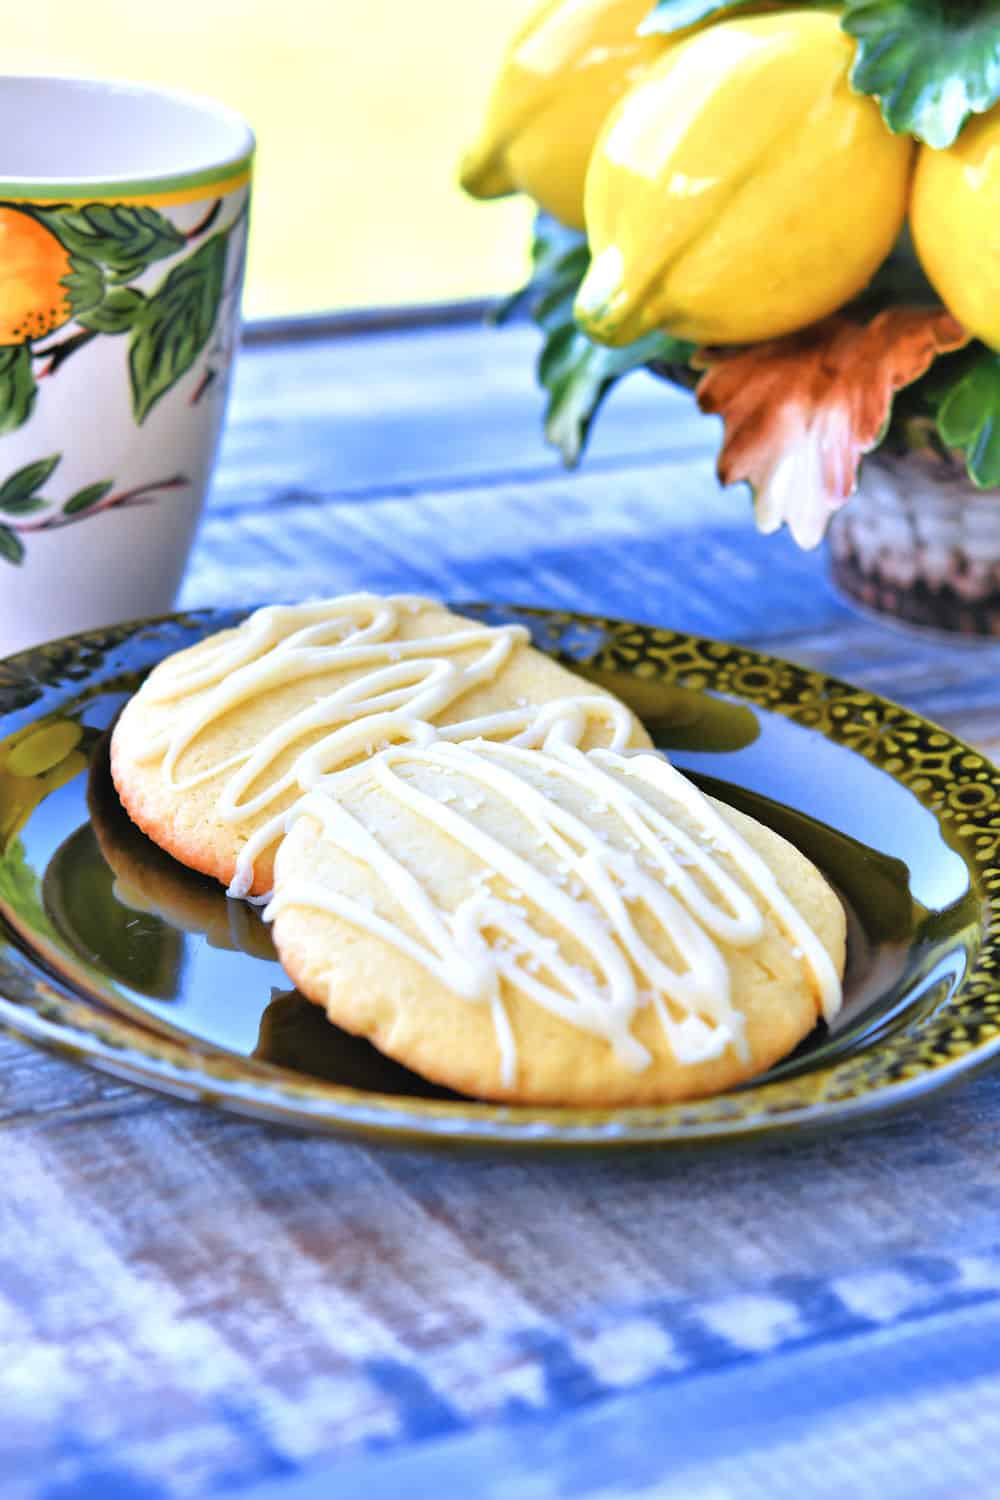 Lemon Sugar Cookies with White Chocolate Drizzle Recipe by Christian Guzman